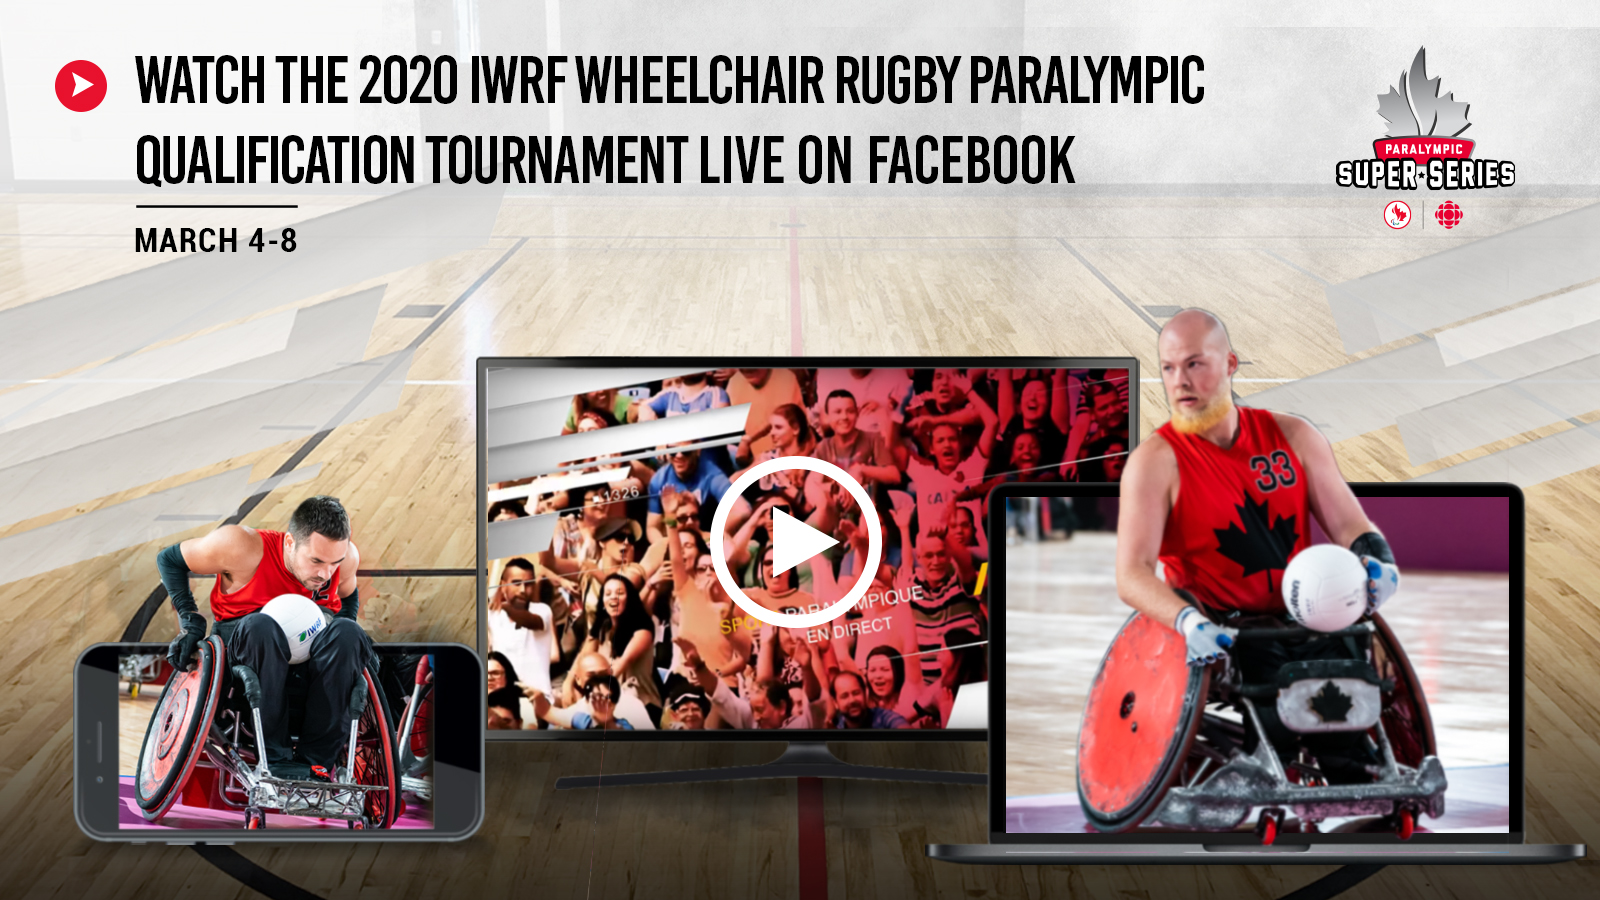 Graphic promoting the live stream of the 2020 IWRF Paralympic Qualification Tournament